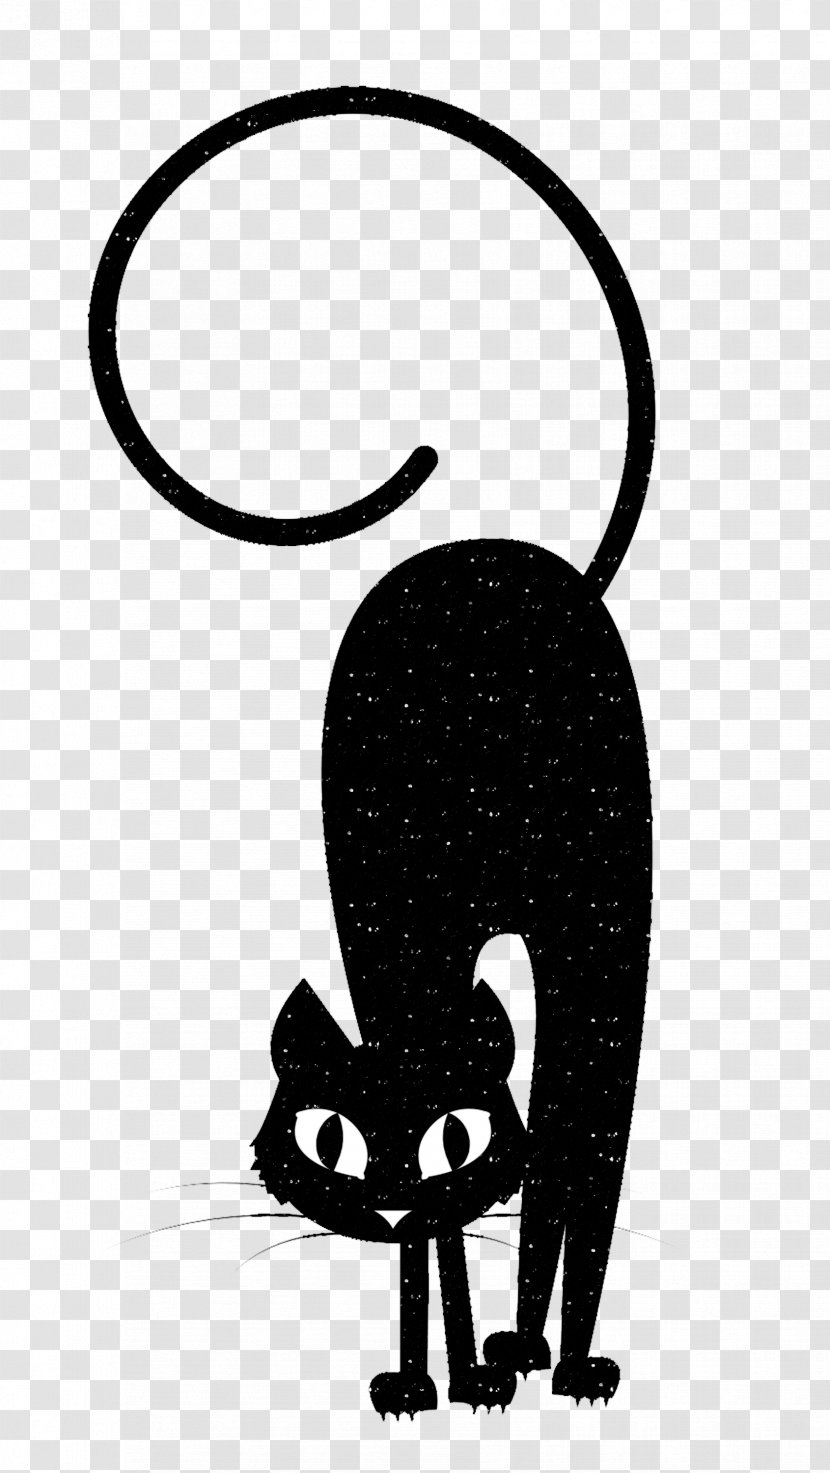 Black Cat - Small To Medium Sized Cats Transparent PNG